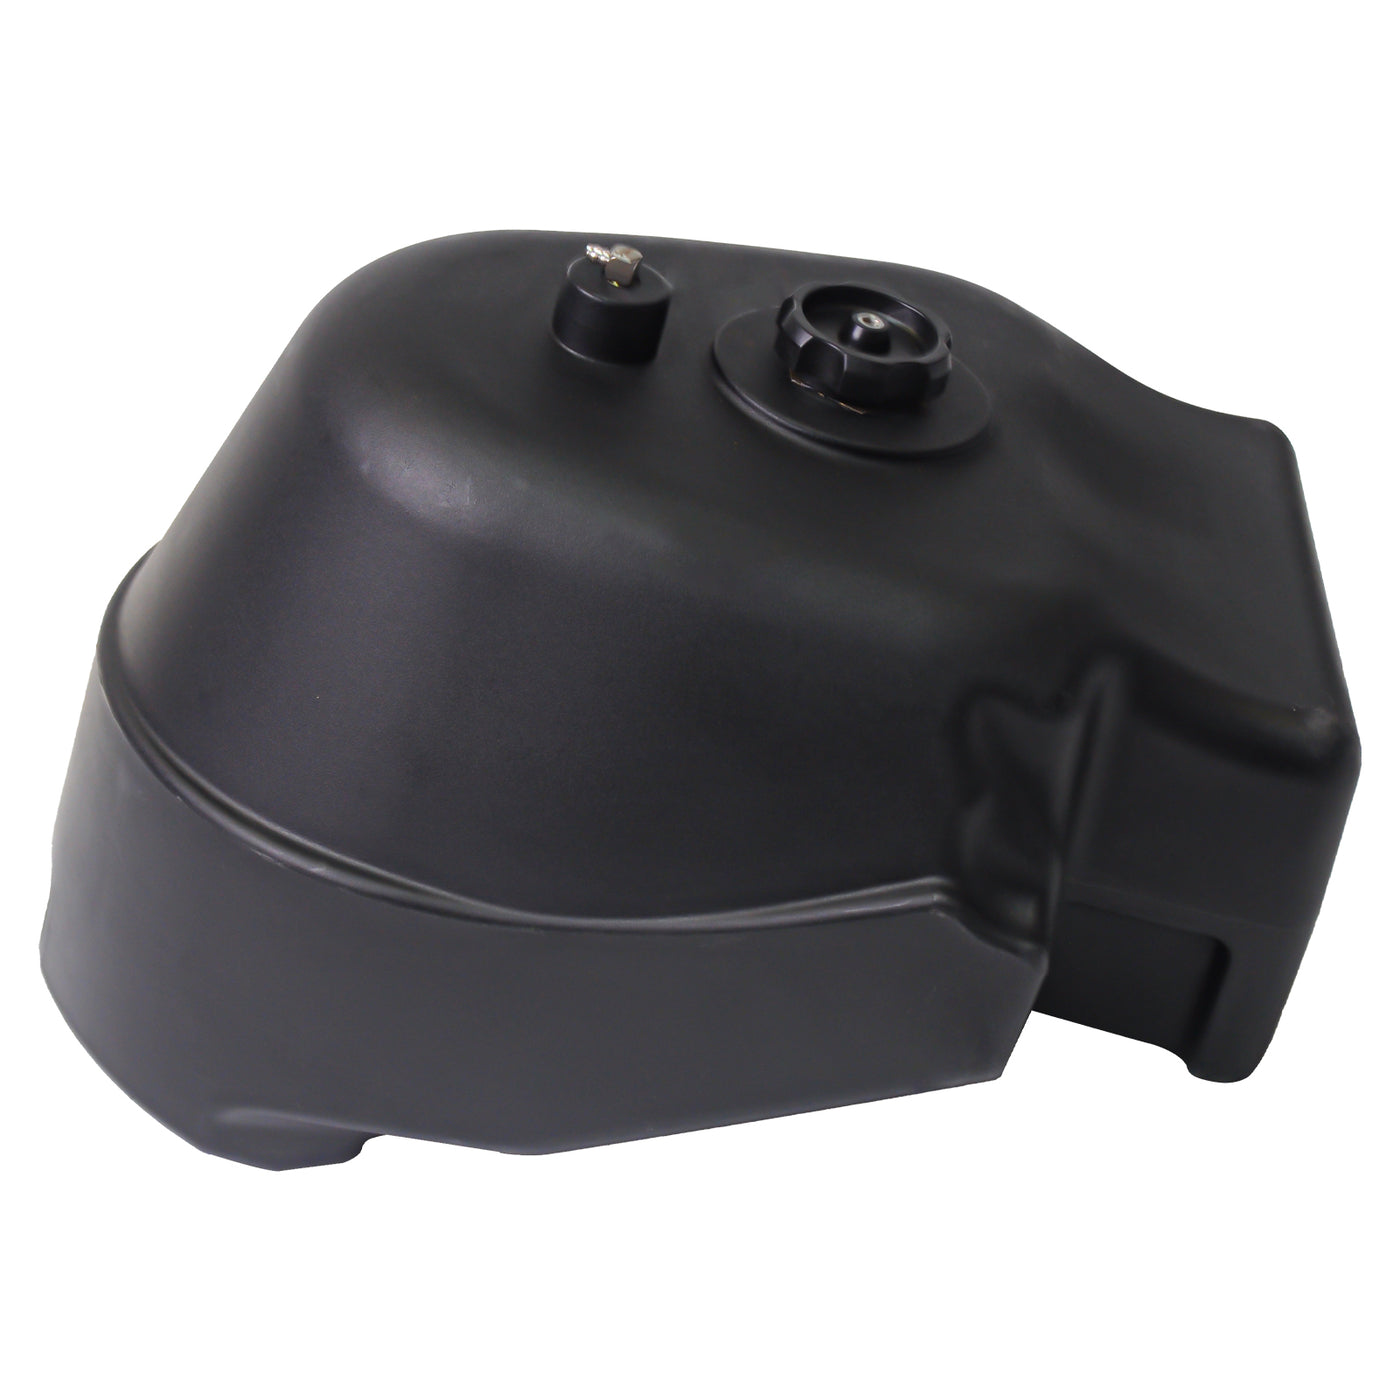 KYMCO Motorcycle Auxiliary Fuel Tank Made of PE Material for kymco xciting 250i/300i/400i (14.17x11.81x13.78 inches, 9L)